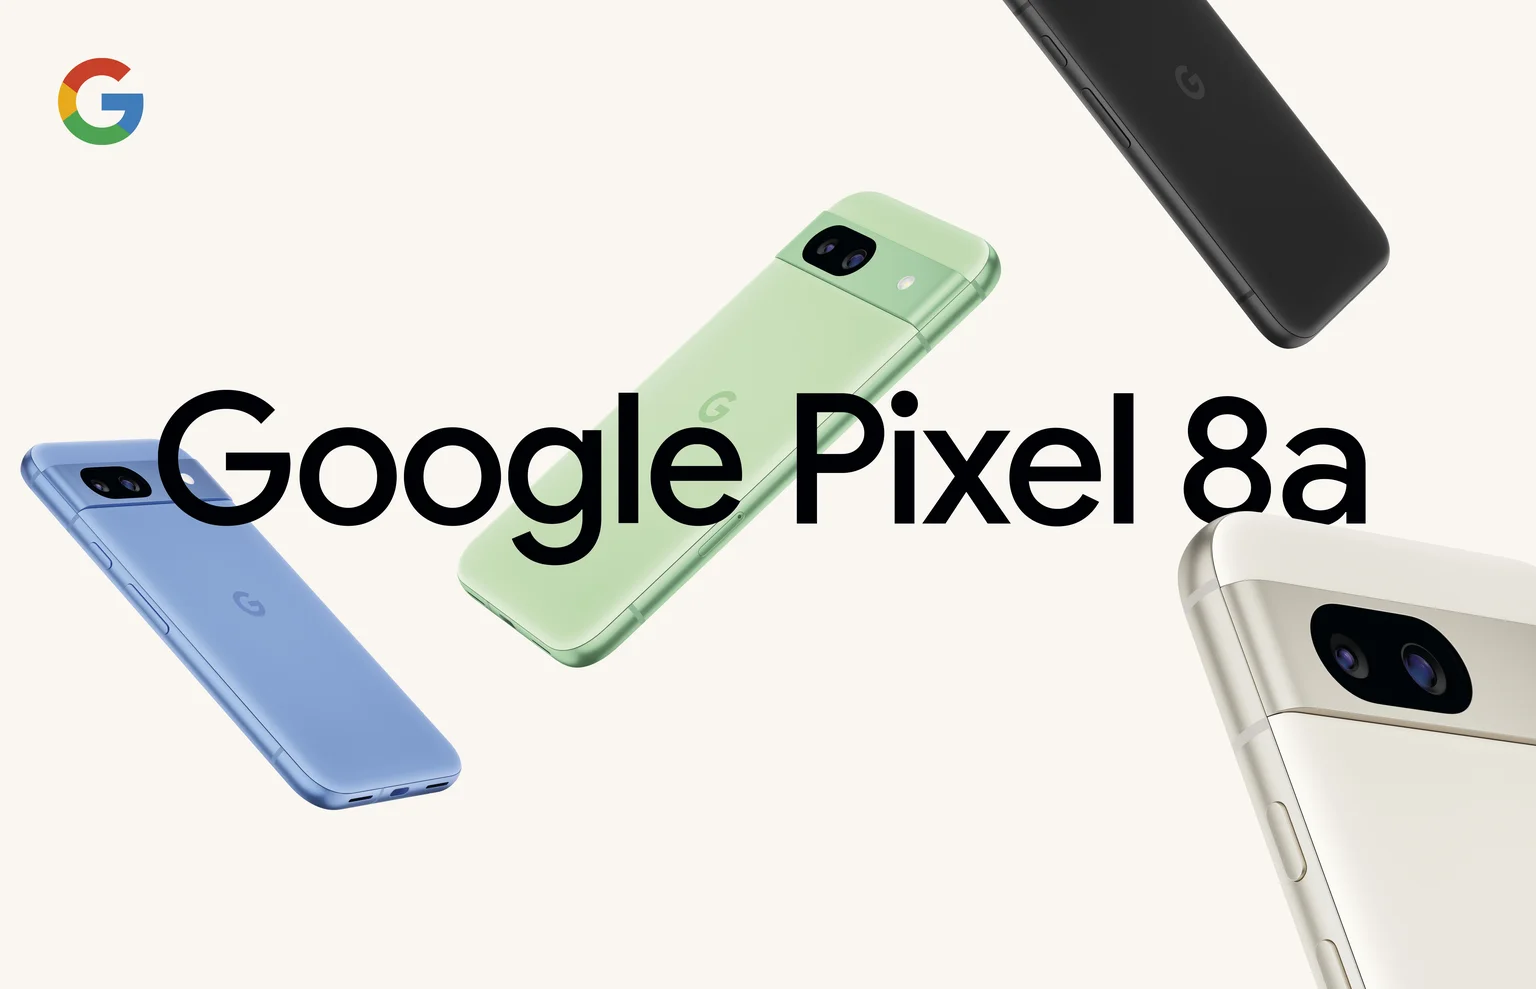 Pixel 8a phones in Bay, Aloe, Obsidian and Porcelain.